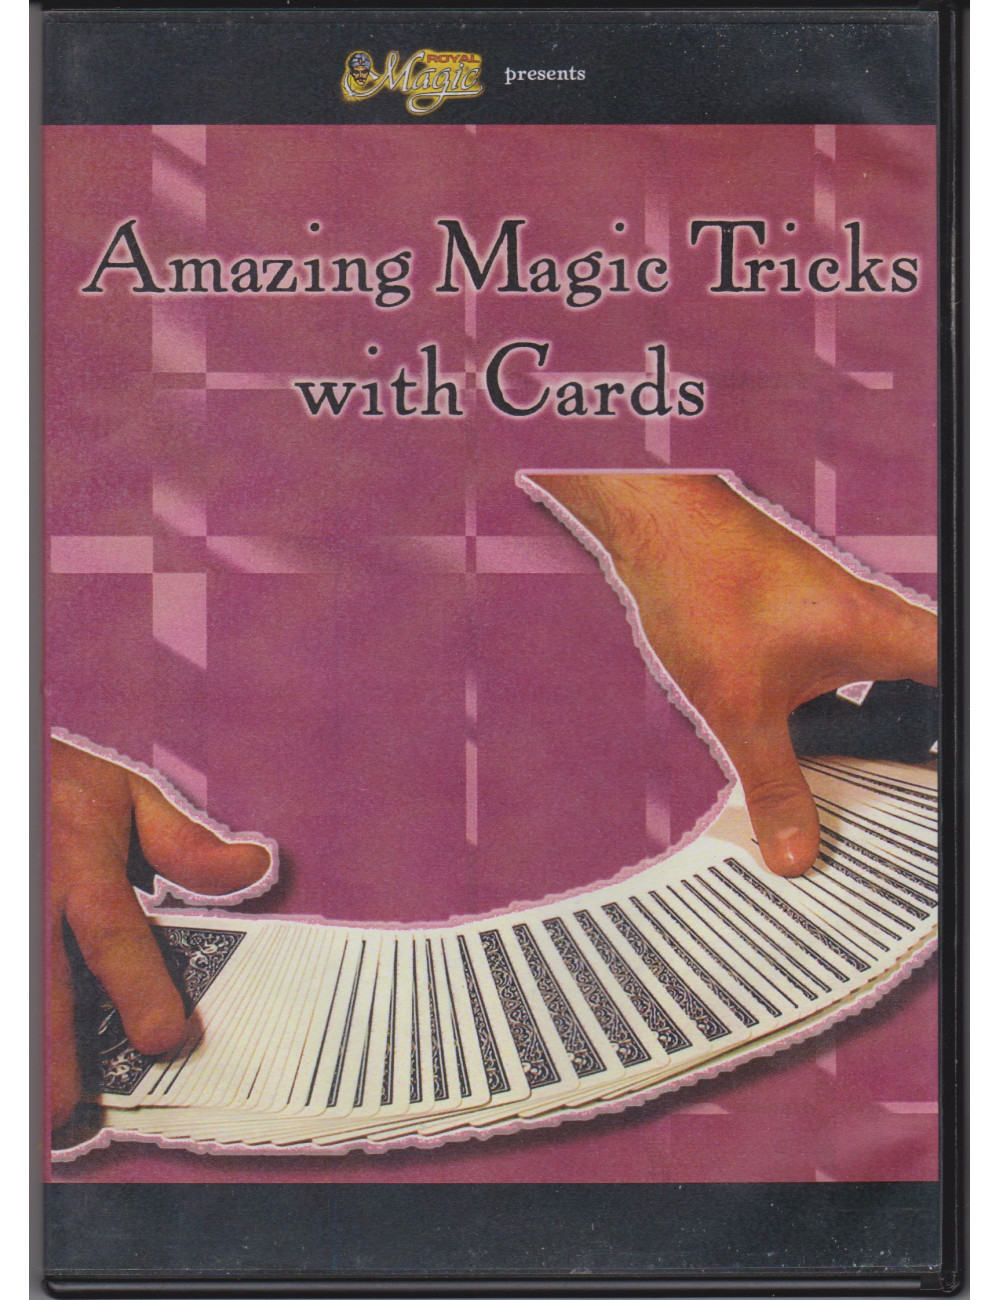 DVD AMAZING MAGIC TRICKS WITH CARDS